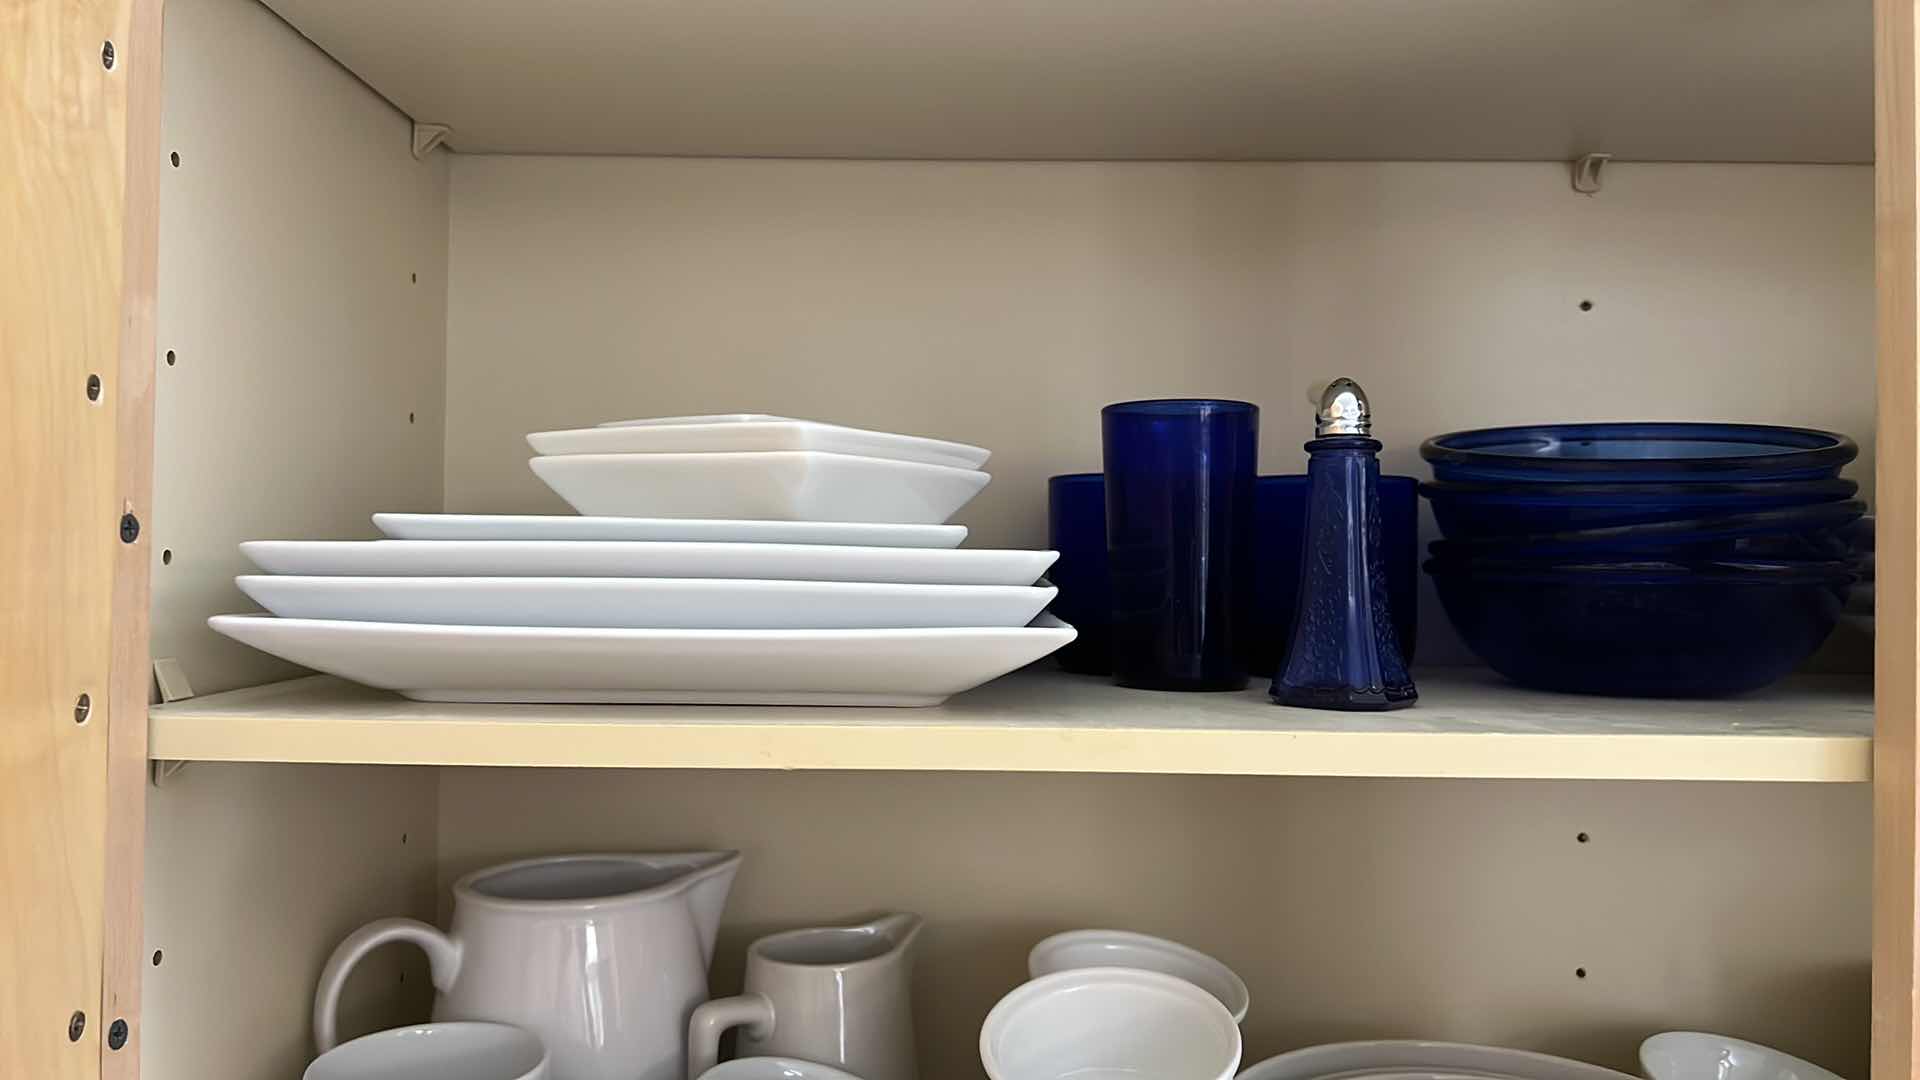 Photo 5 of CONTENTS OF KITCHEN CABINET-WHITE DISHWARE